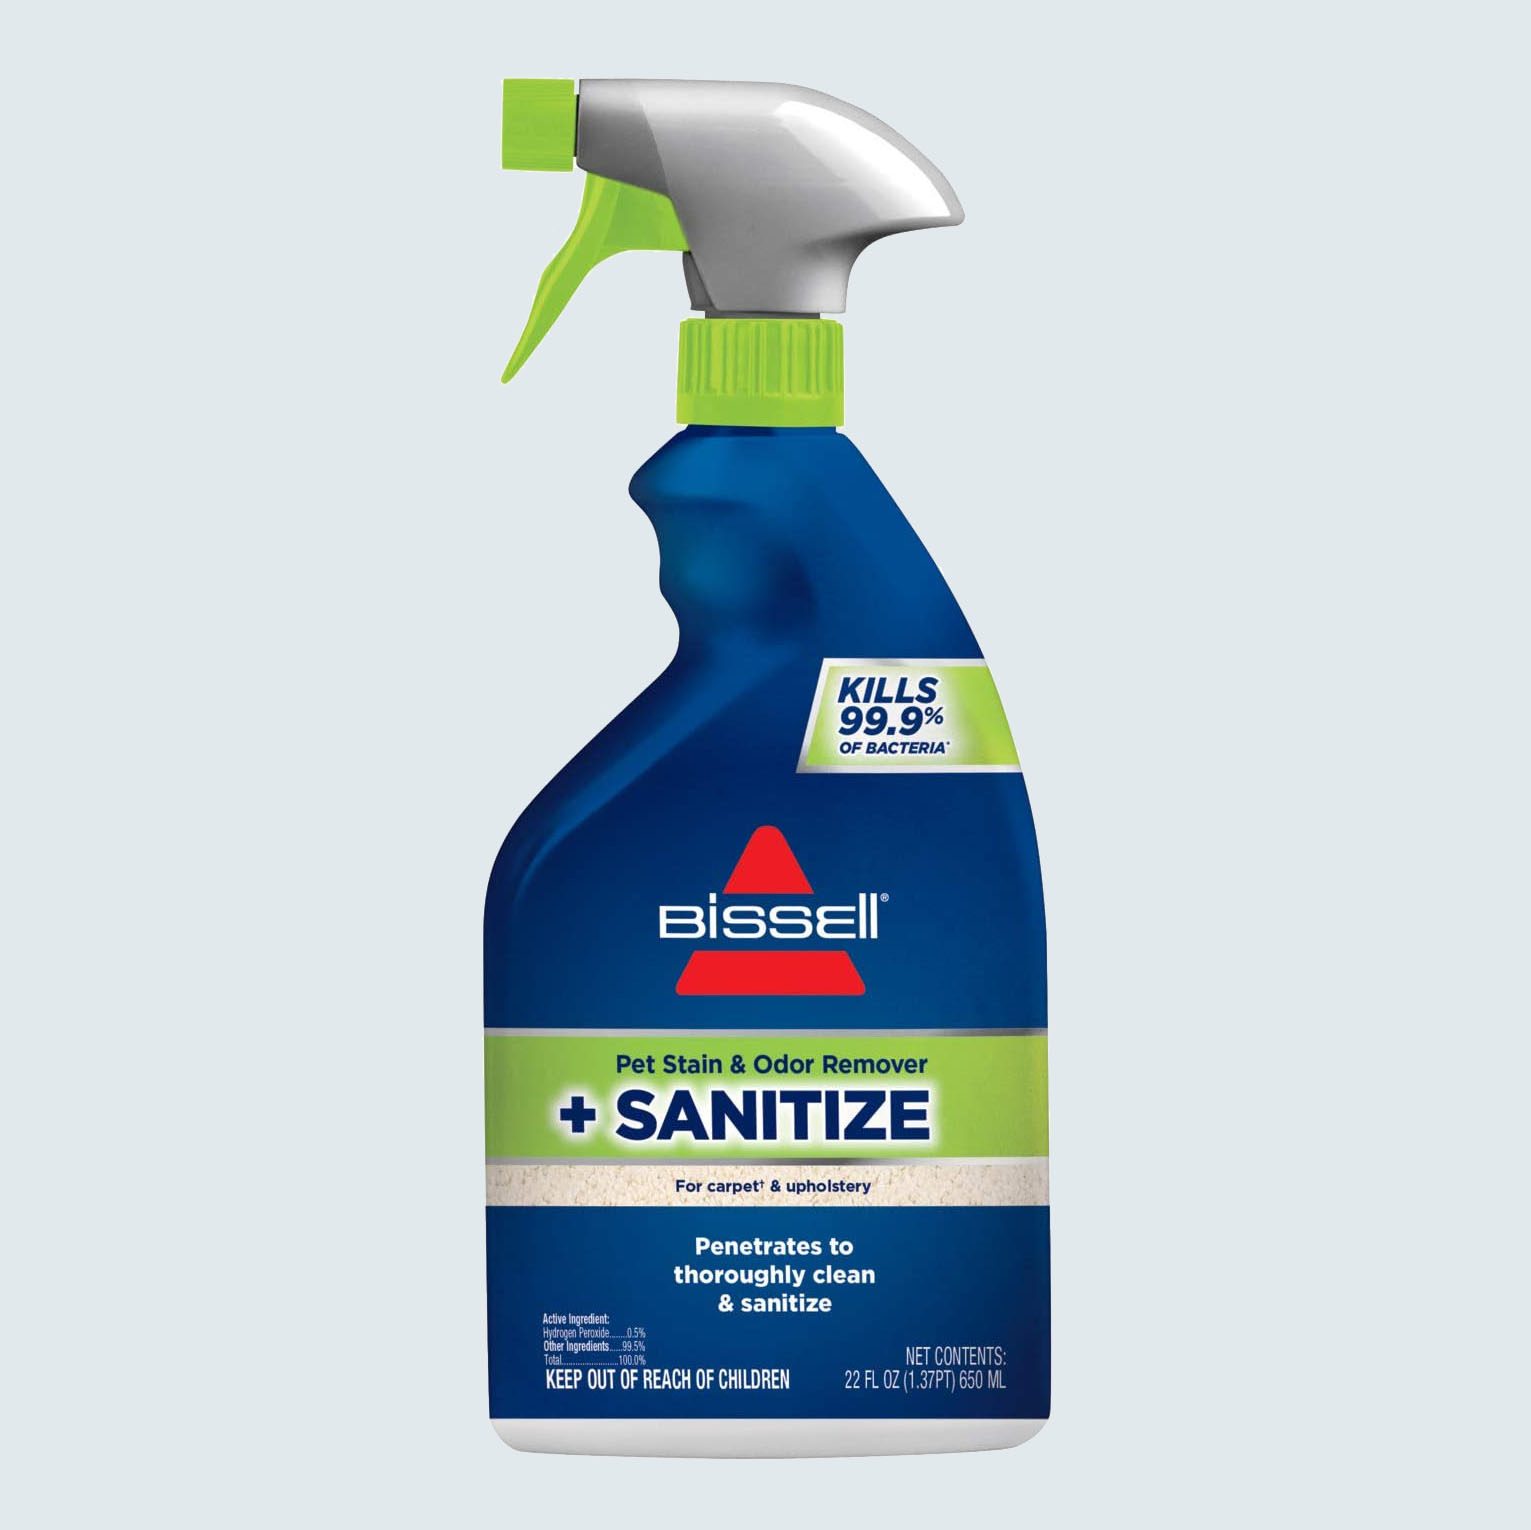 Bissell Pet Stain & Odor Remover + Sanitize